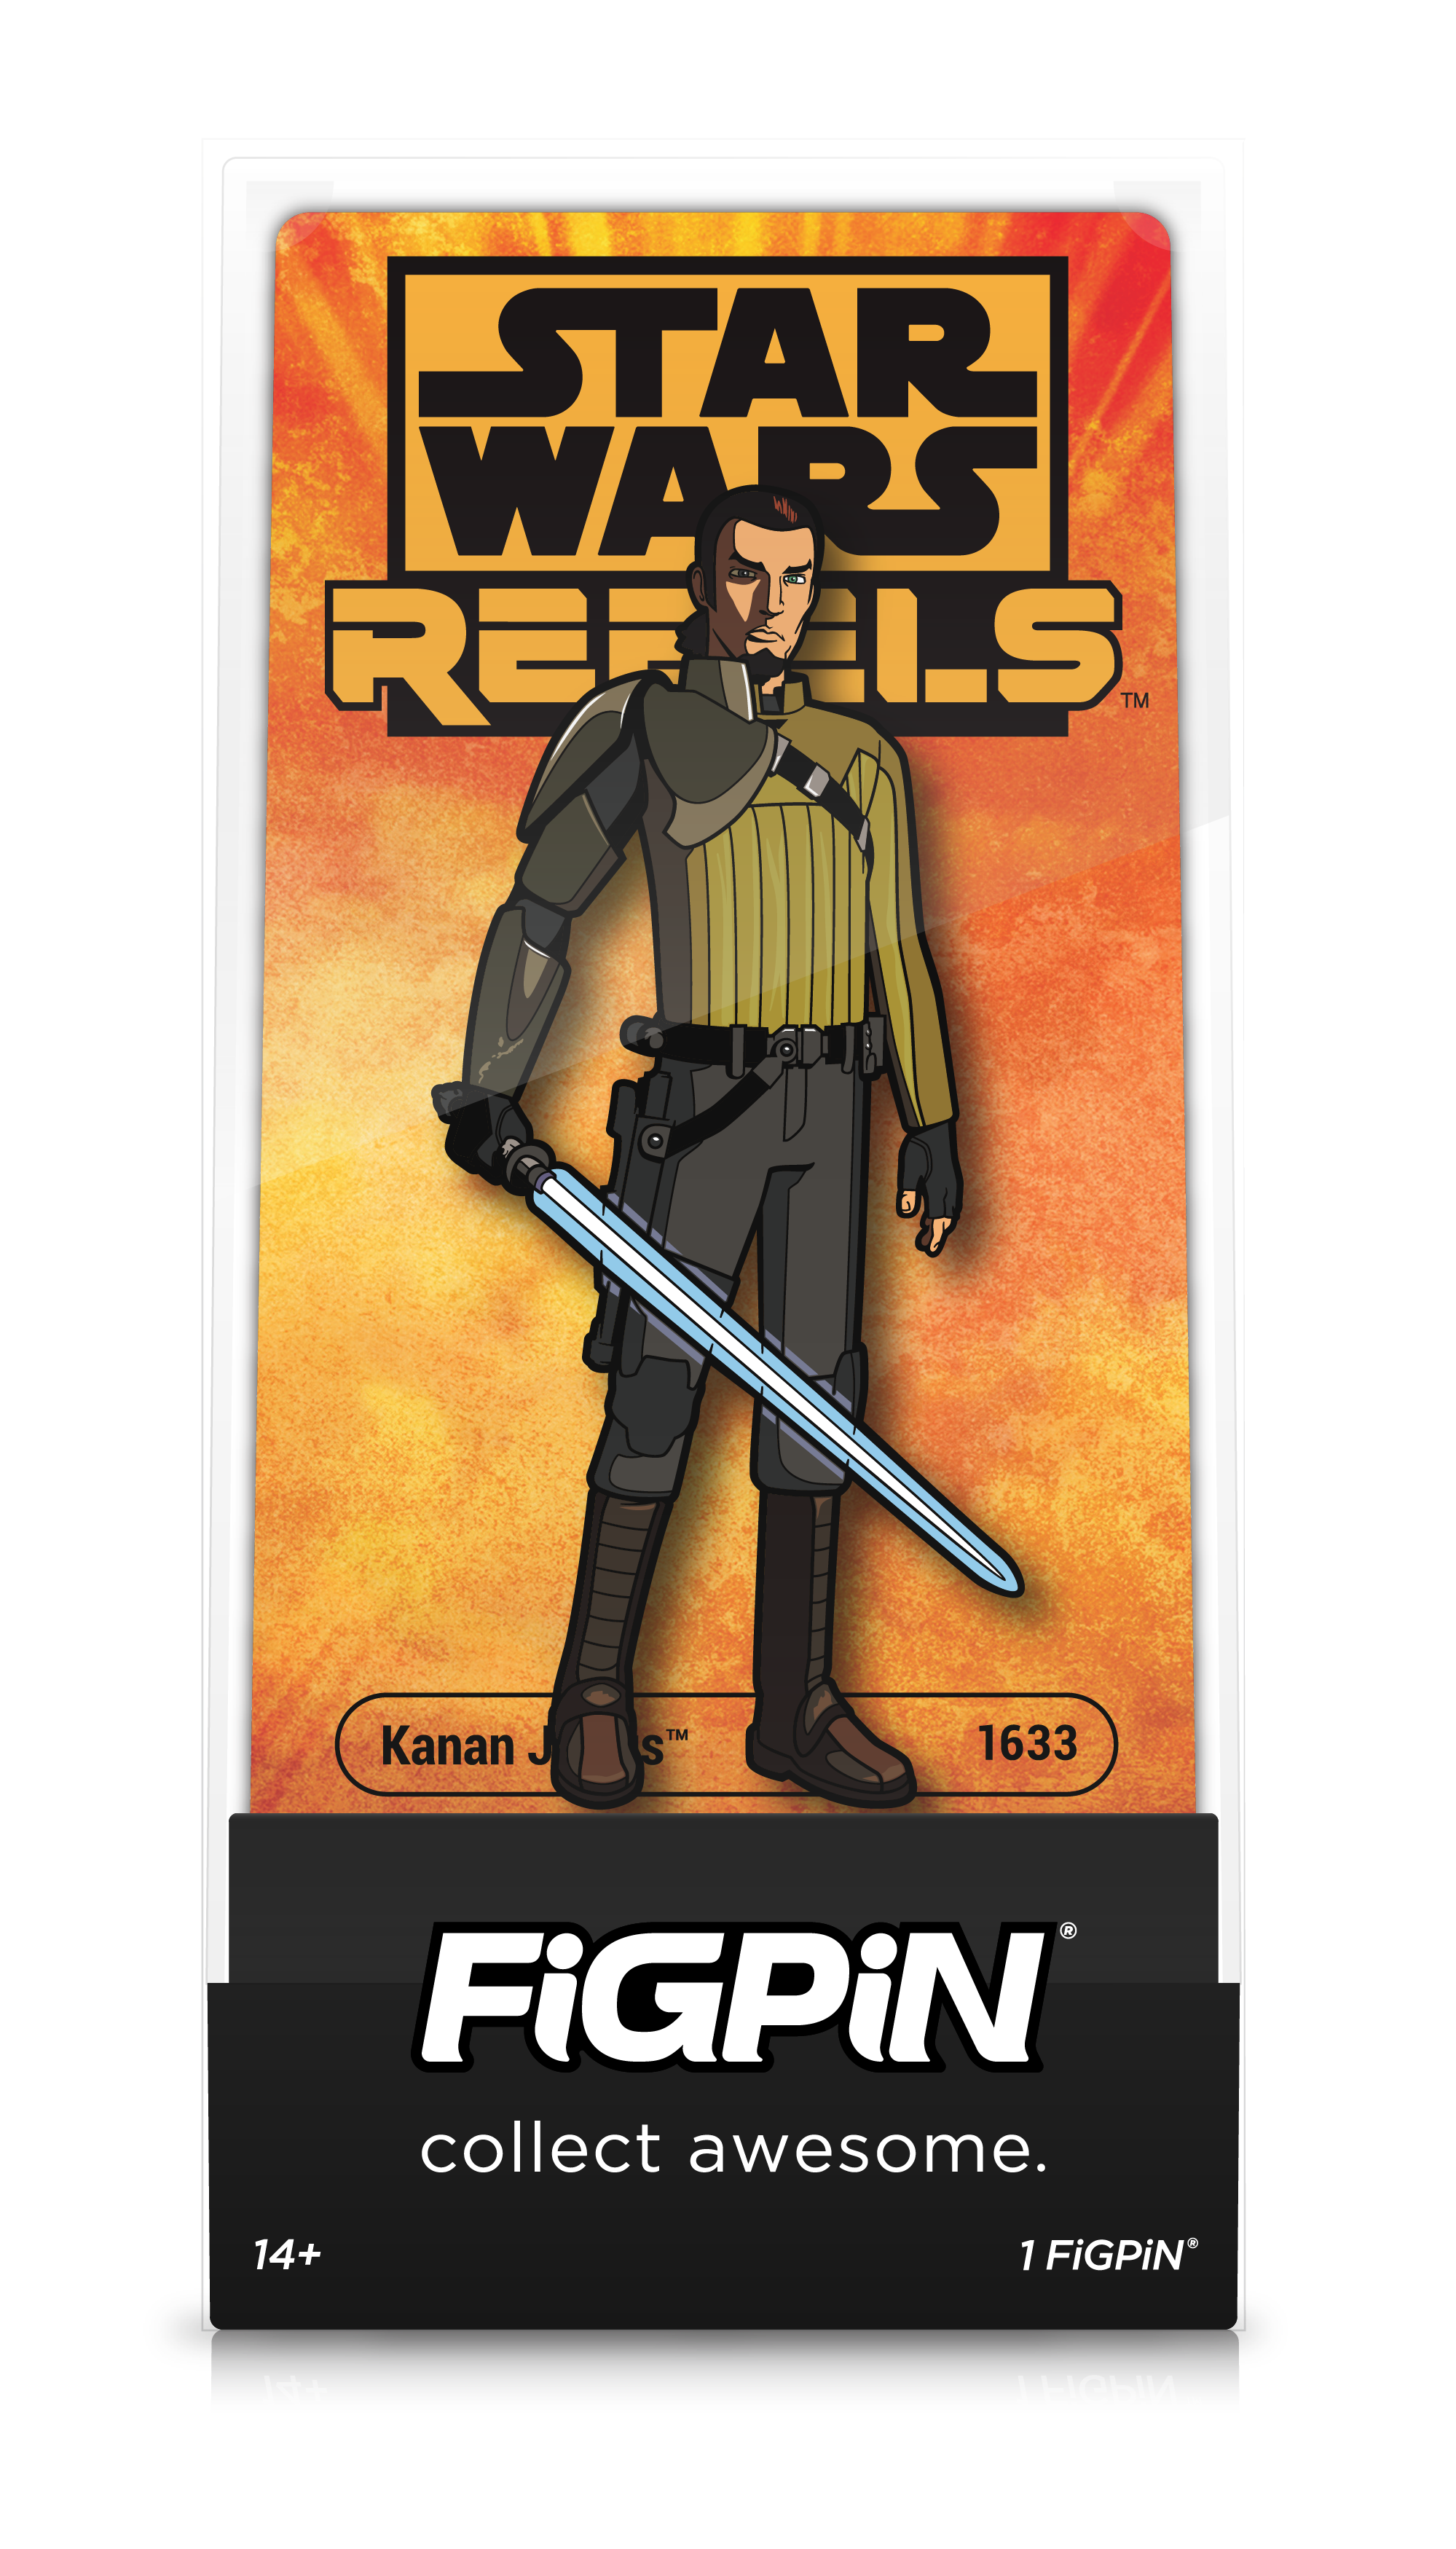 Front view of STAR WARS REBELS' Kanan Jarrus enamel pin inside FiGPiN display case reading "collect awesome"